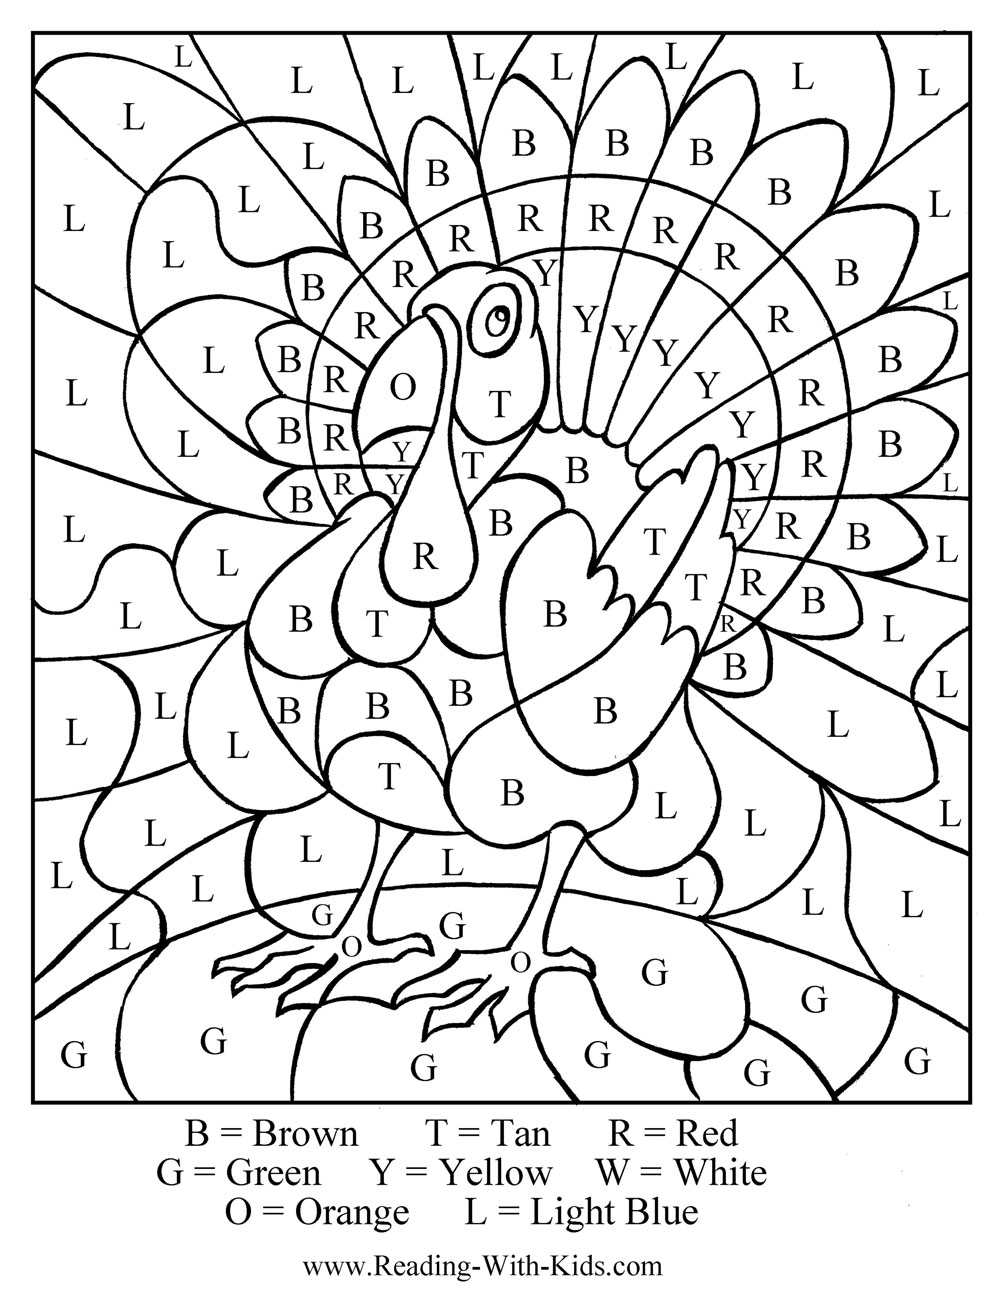 Free Thanksgiving Coloring Pages   Games Printables    Thanksgiving